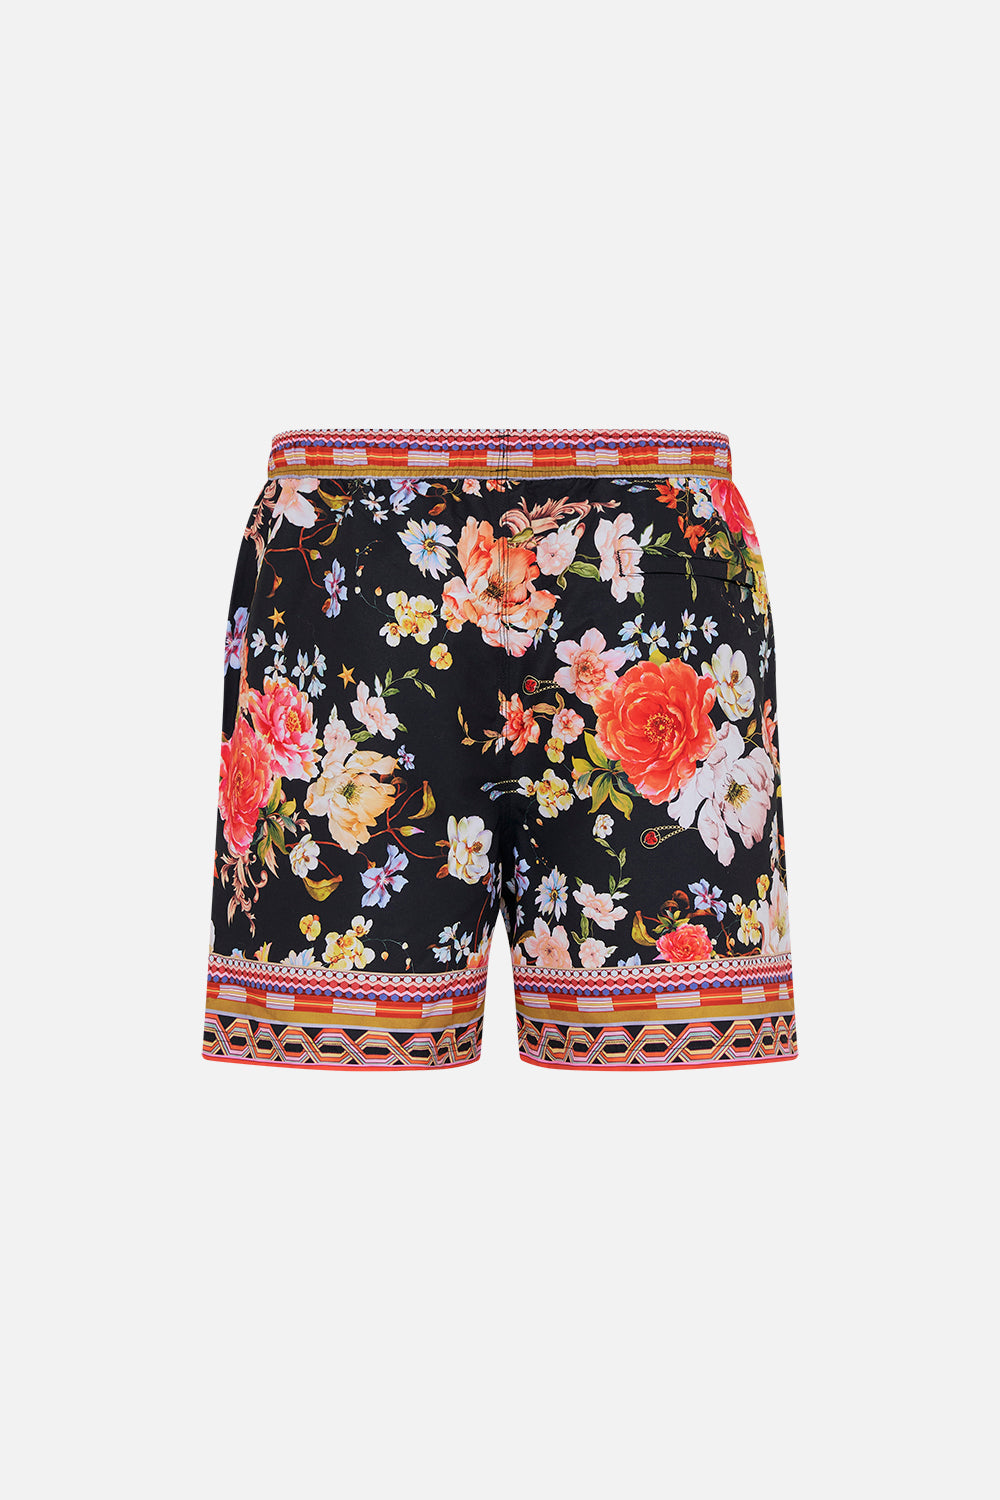 Back product view of Hotel Franks by CAMILLA mens black floral print boardshorts in Secret History print